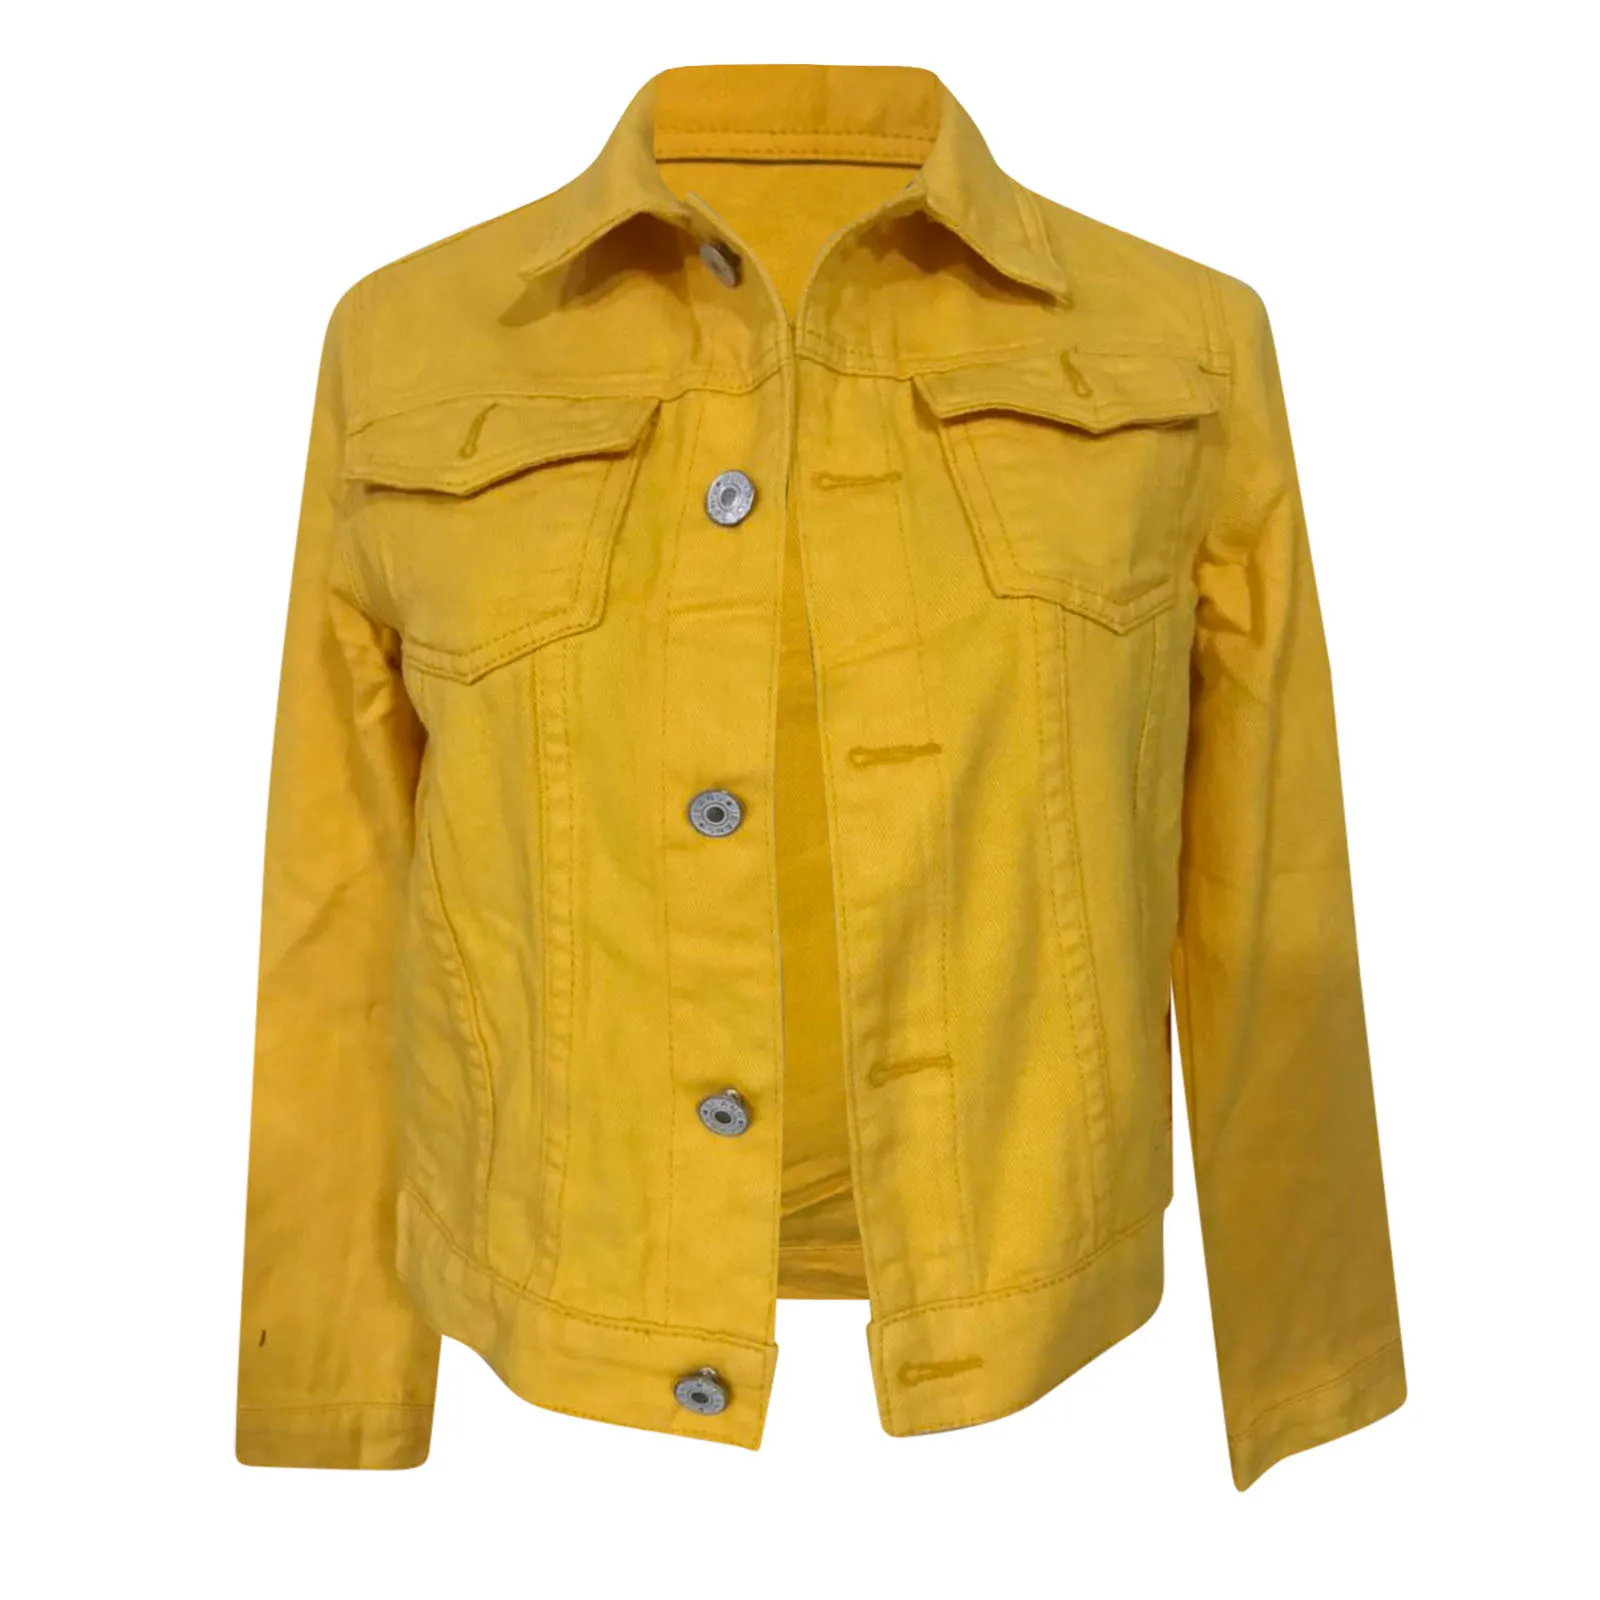 Yellow Jean Jacket For Women One Size Korean Style Denim Coat 2021 Spring  Fall New Short Plus Size Jeans Jackets With Pocket - Jackets - AliExpress